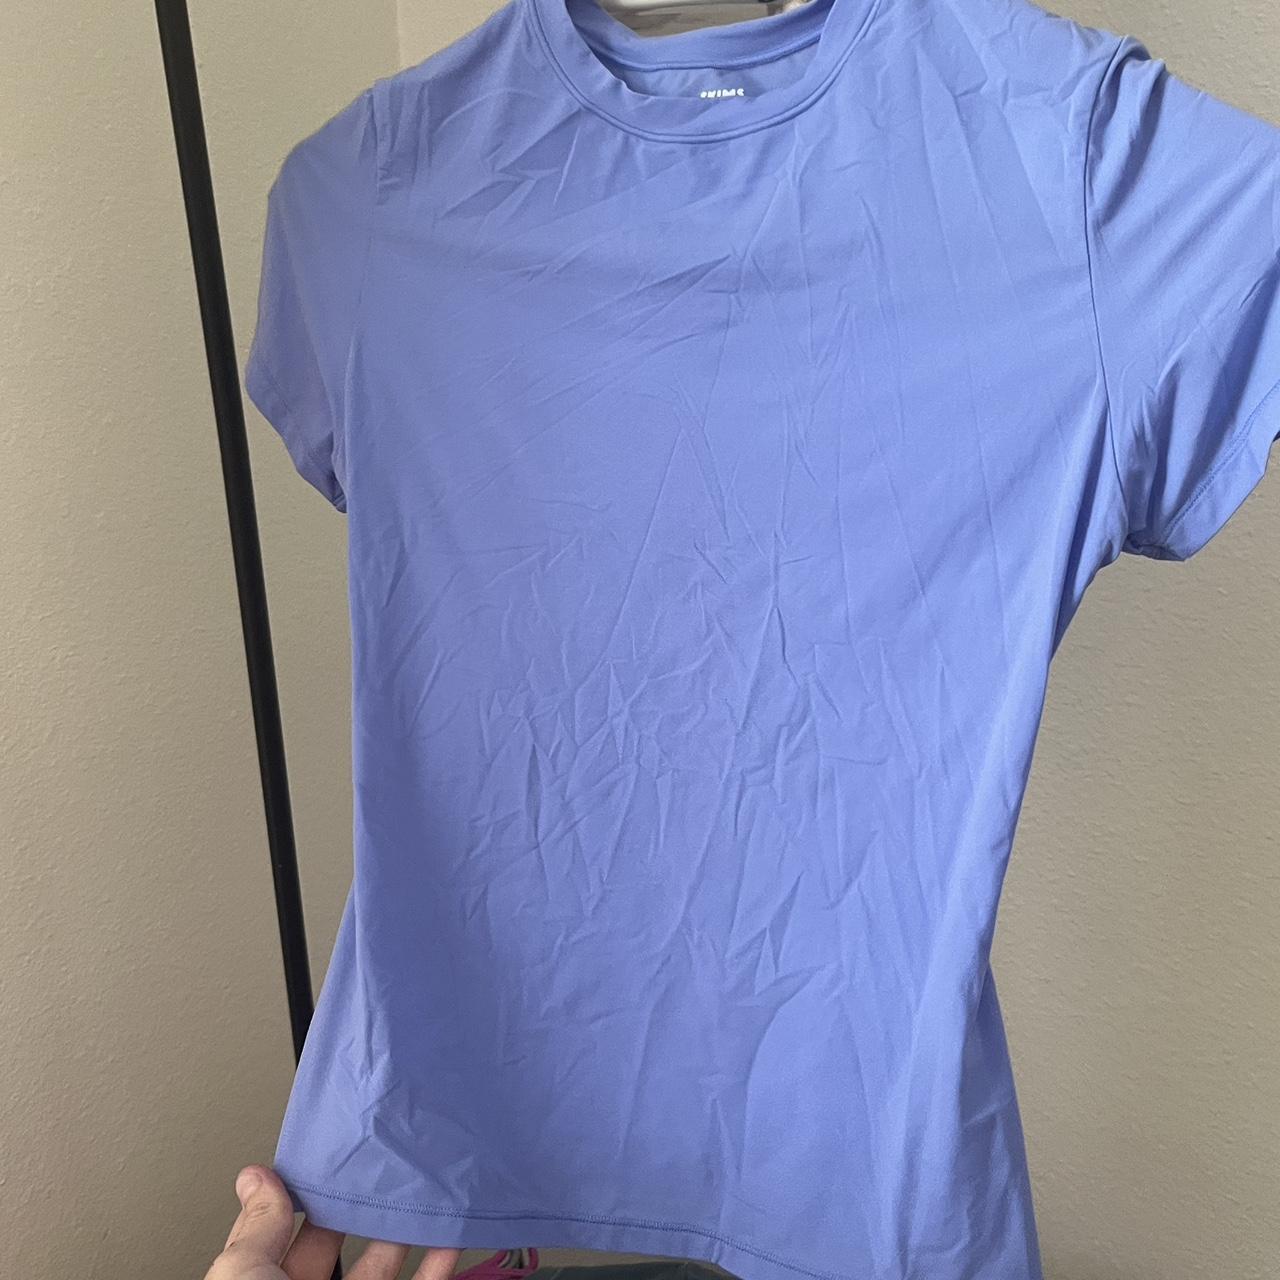 Skims fits everybody shirt in color cielo. Never worn - Depop